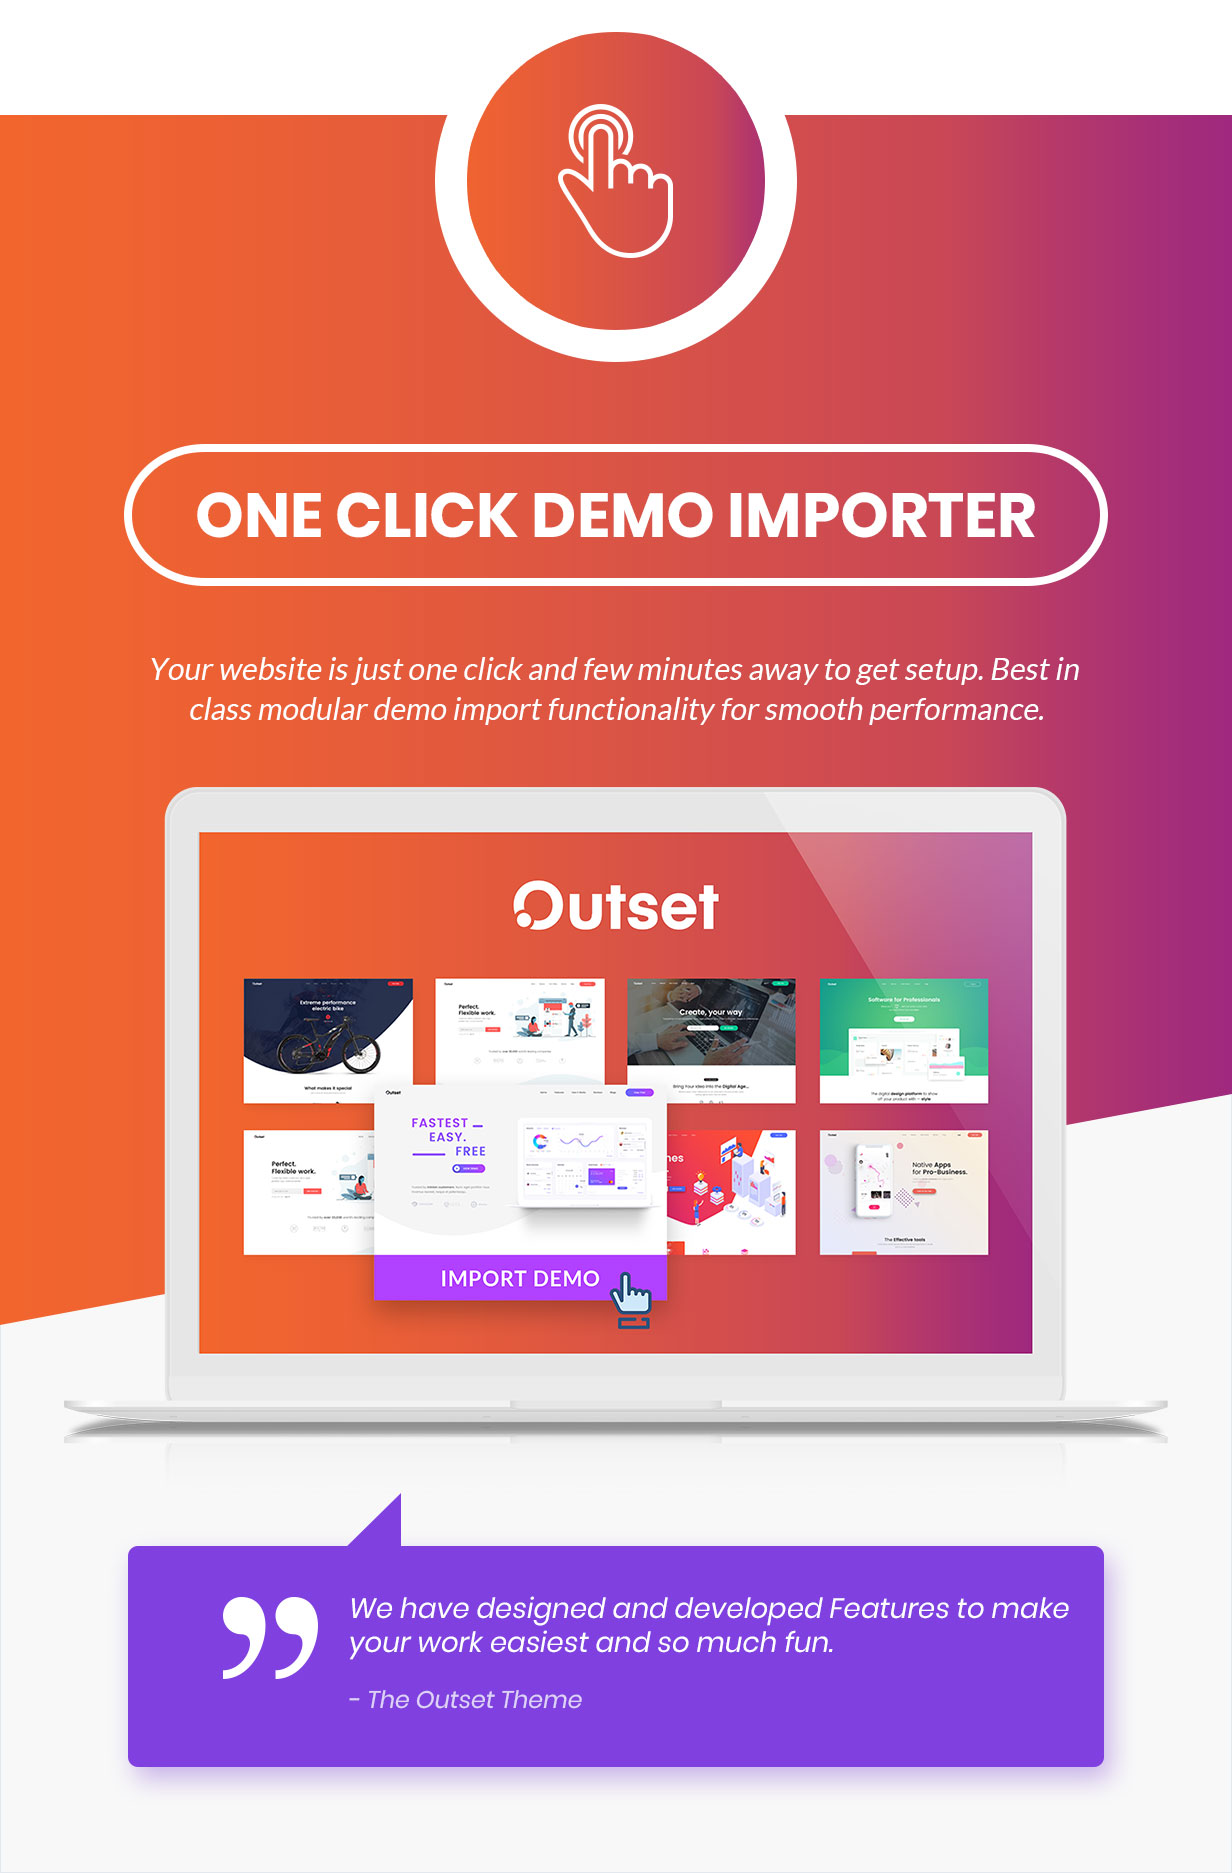 The Outset - SaaS, App, Product & Tech Software Startup Theme - 3